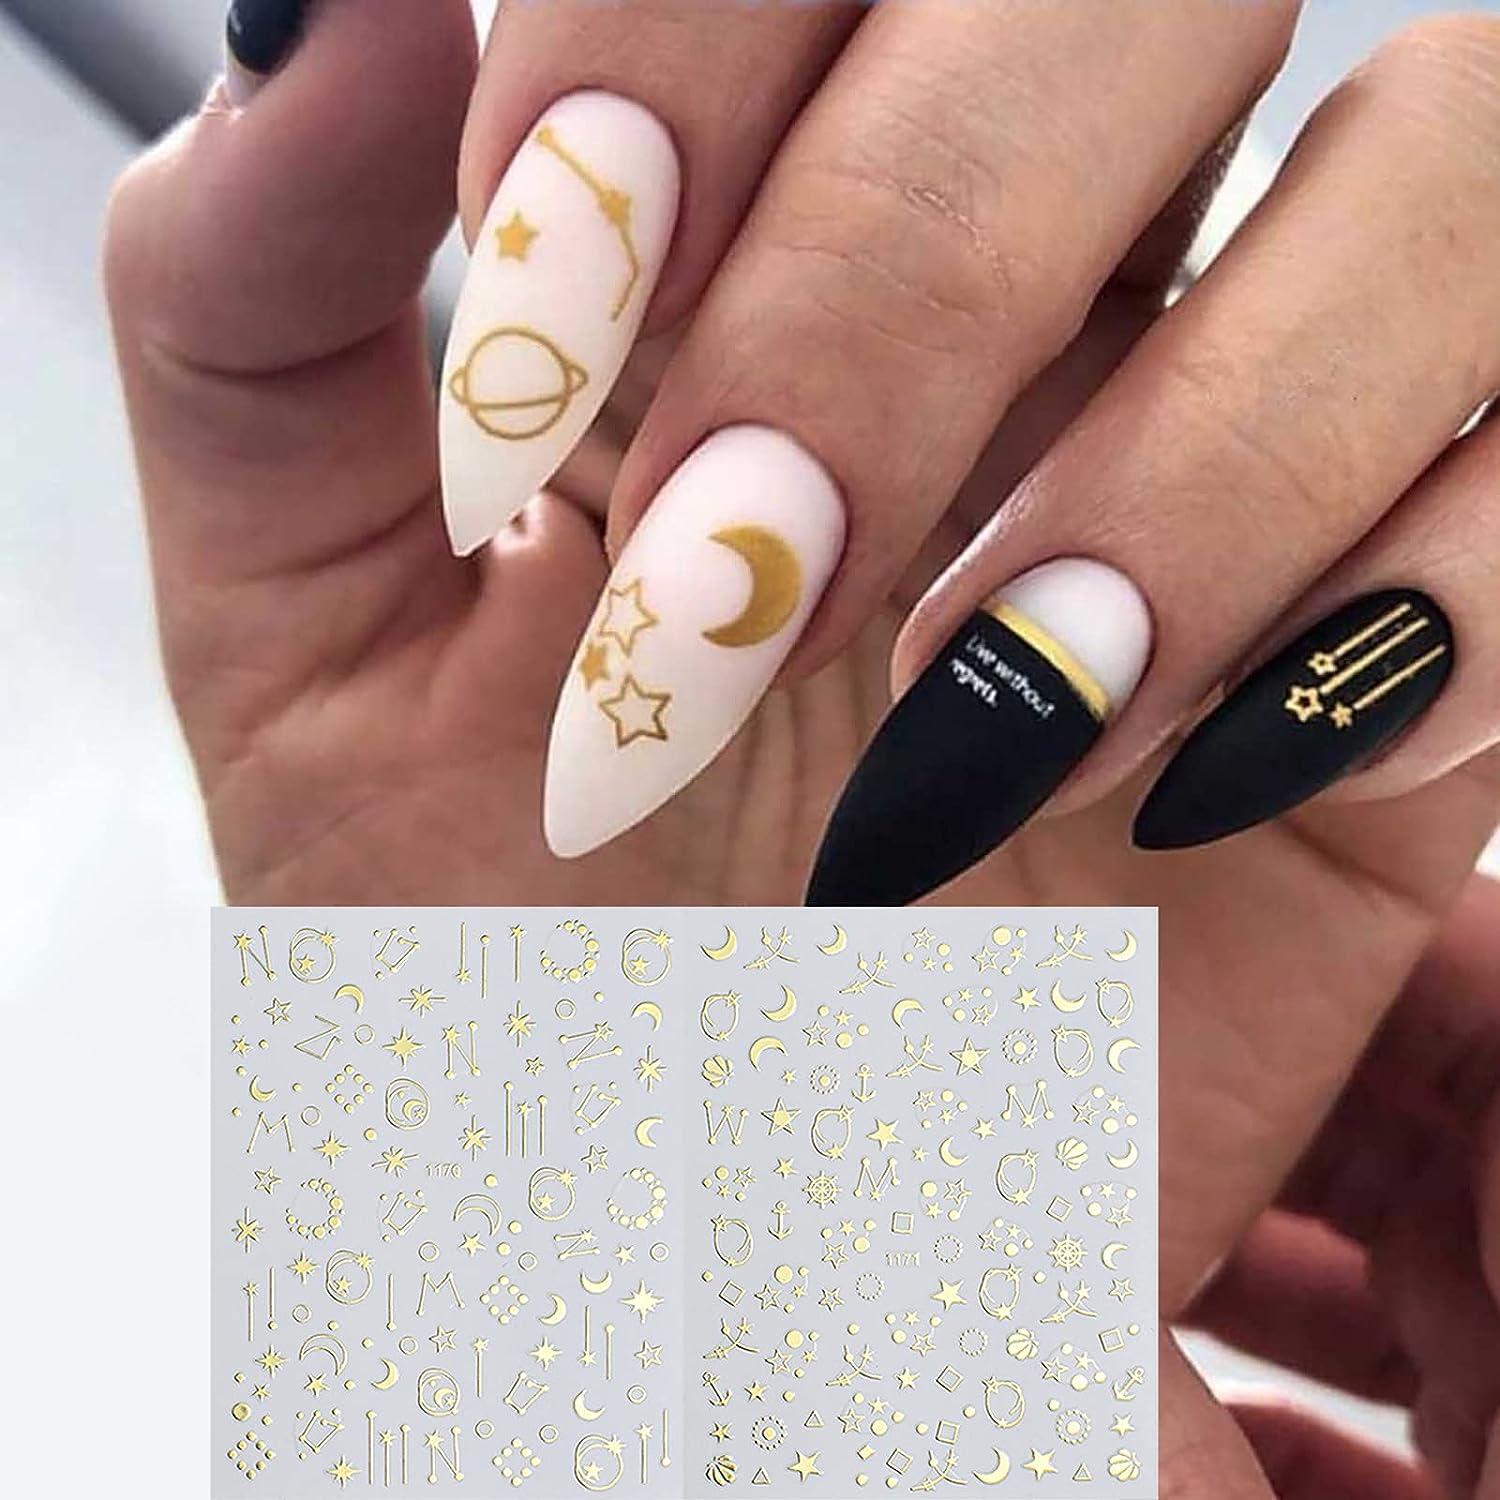 Moody French Moon Nails Are Giving A Modern Remix To Basic Tips